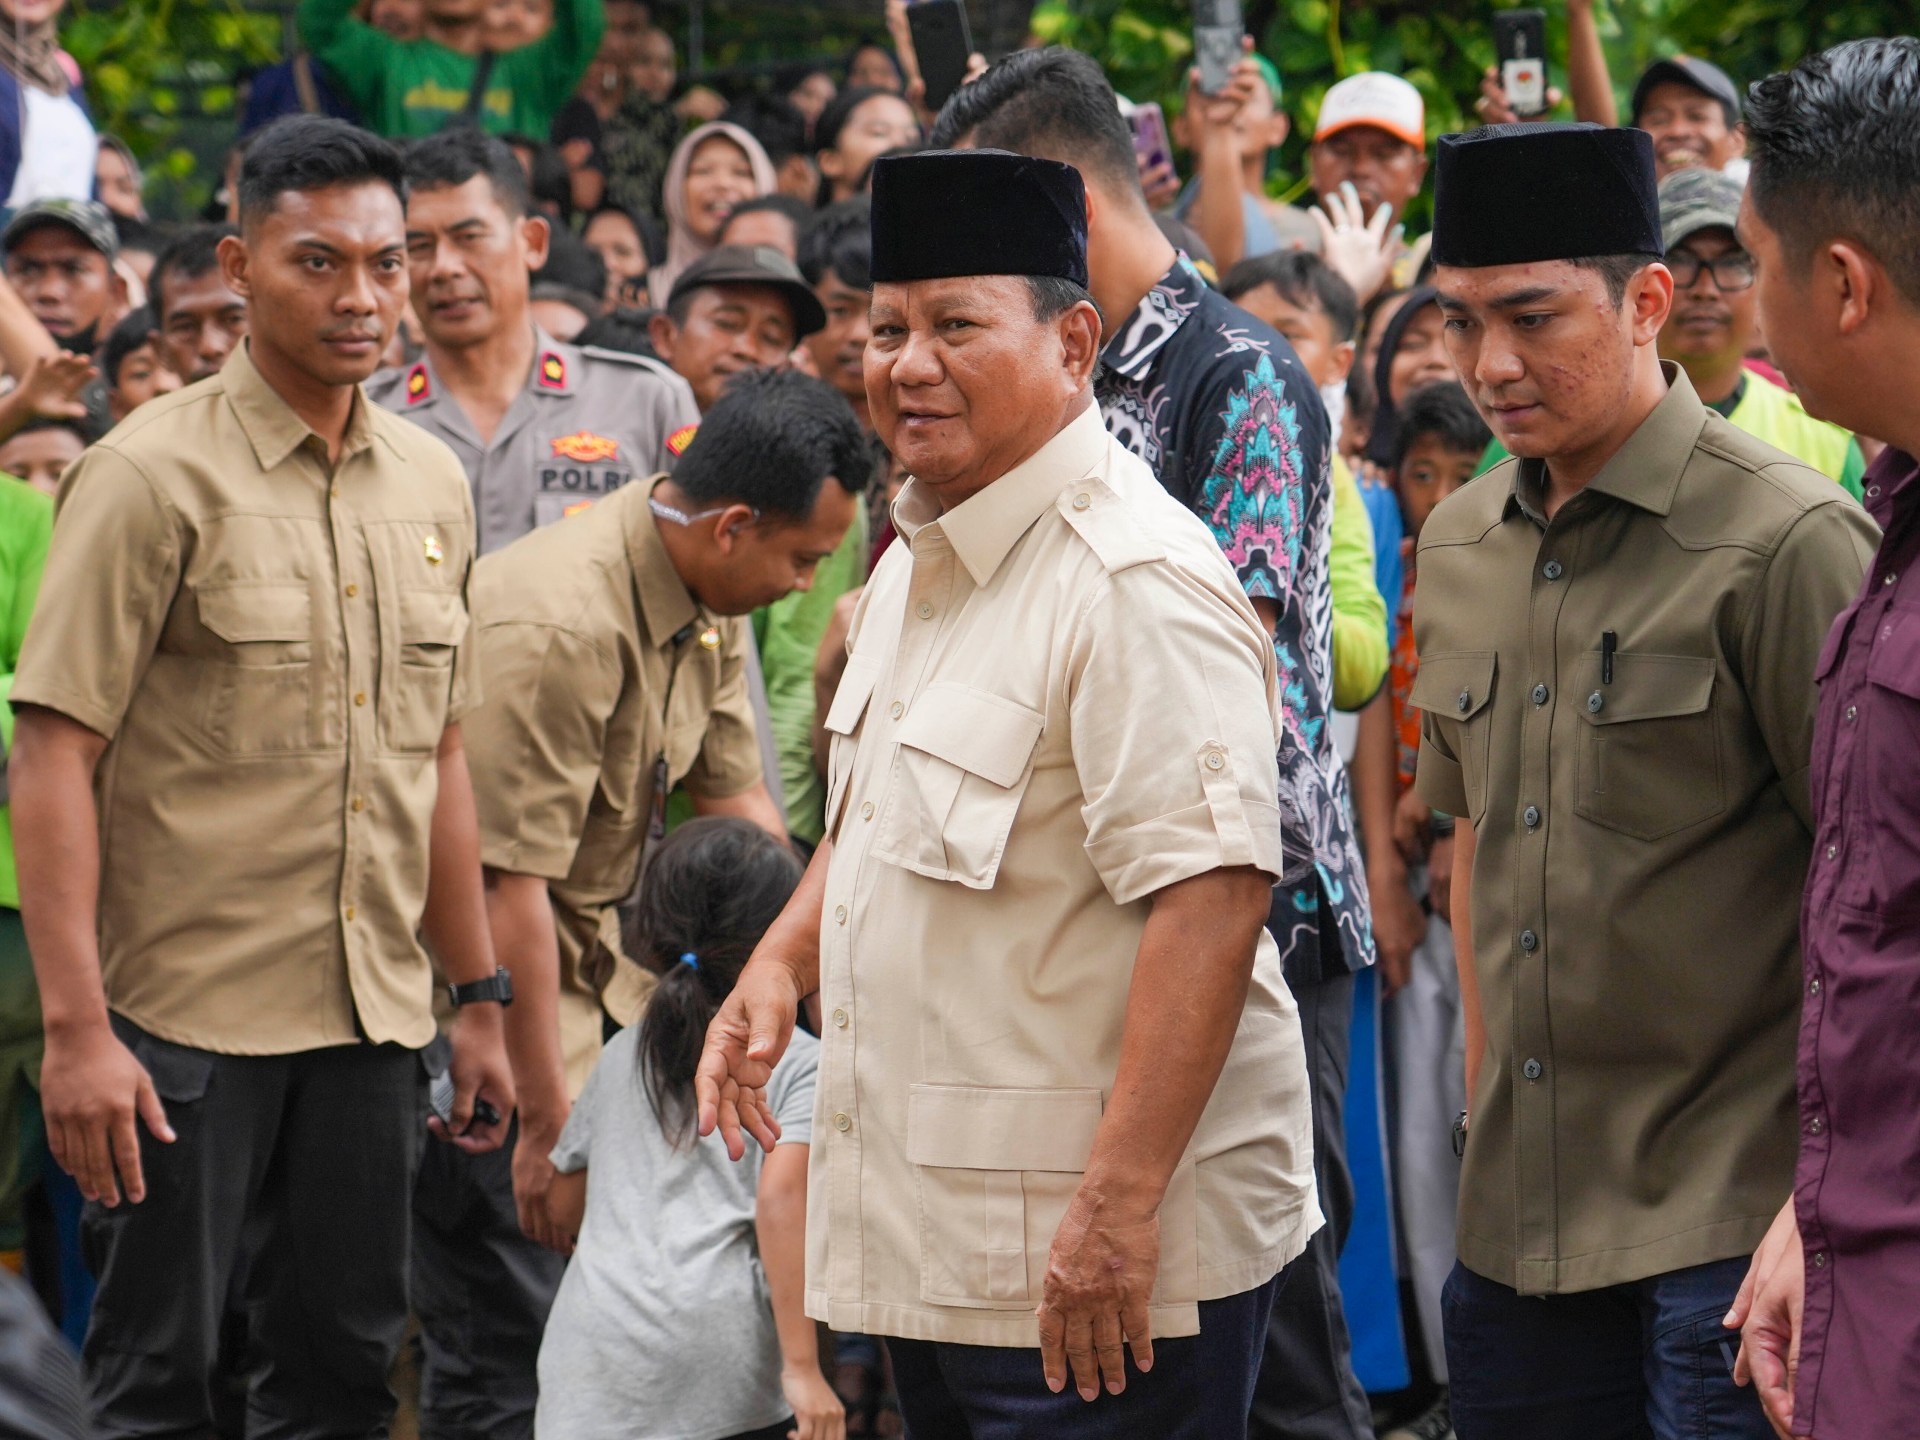 Who is Prabowo Subianto, the man likely to be Indonesias next president? | Politics News [Video]